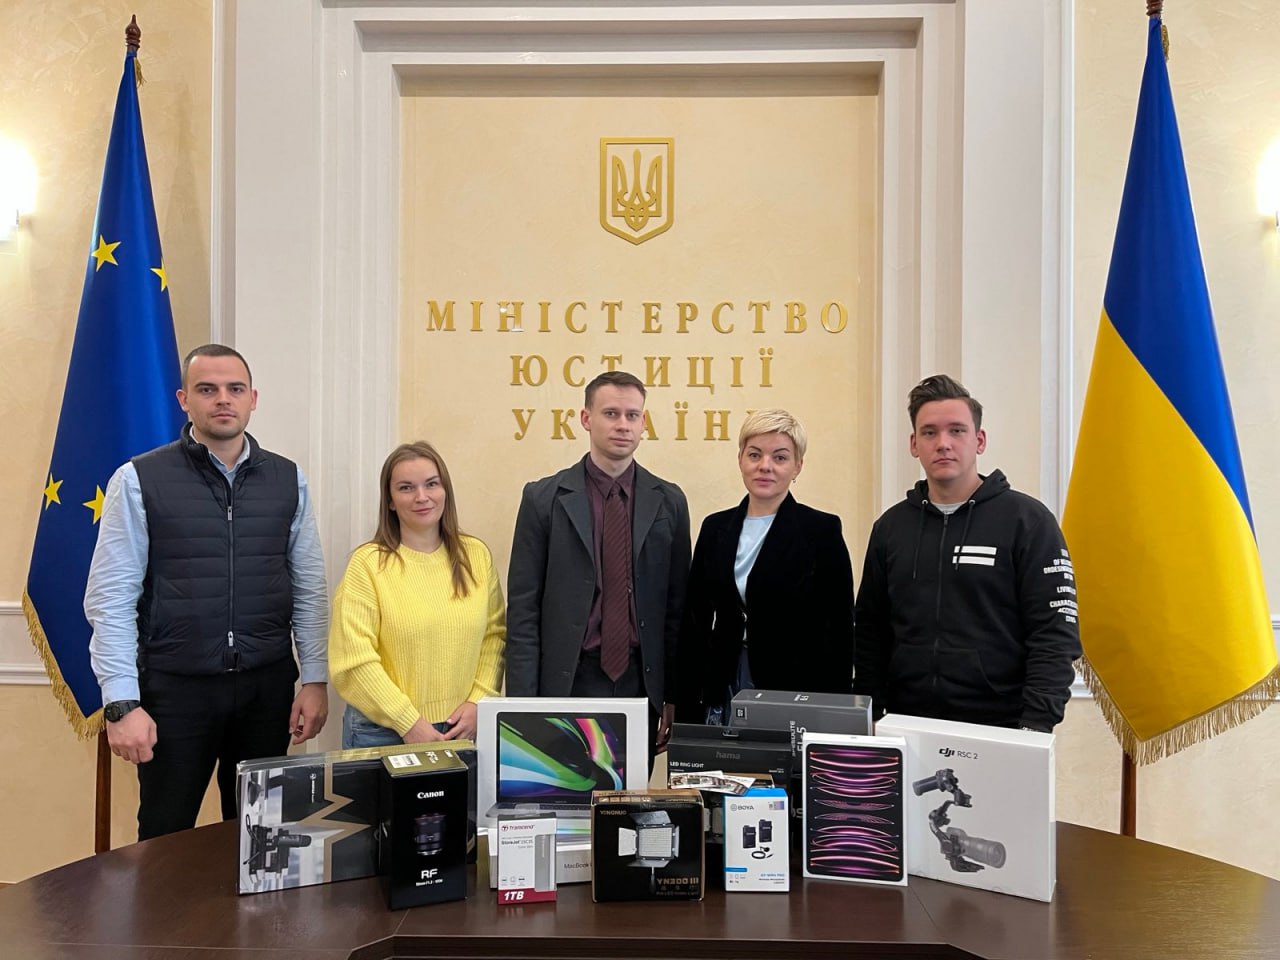 EU Project Pravo-Justice Handed Over to the Penitentiary Academy of Ukraine the Equipment for the Creation of Educational Video Materials